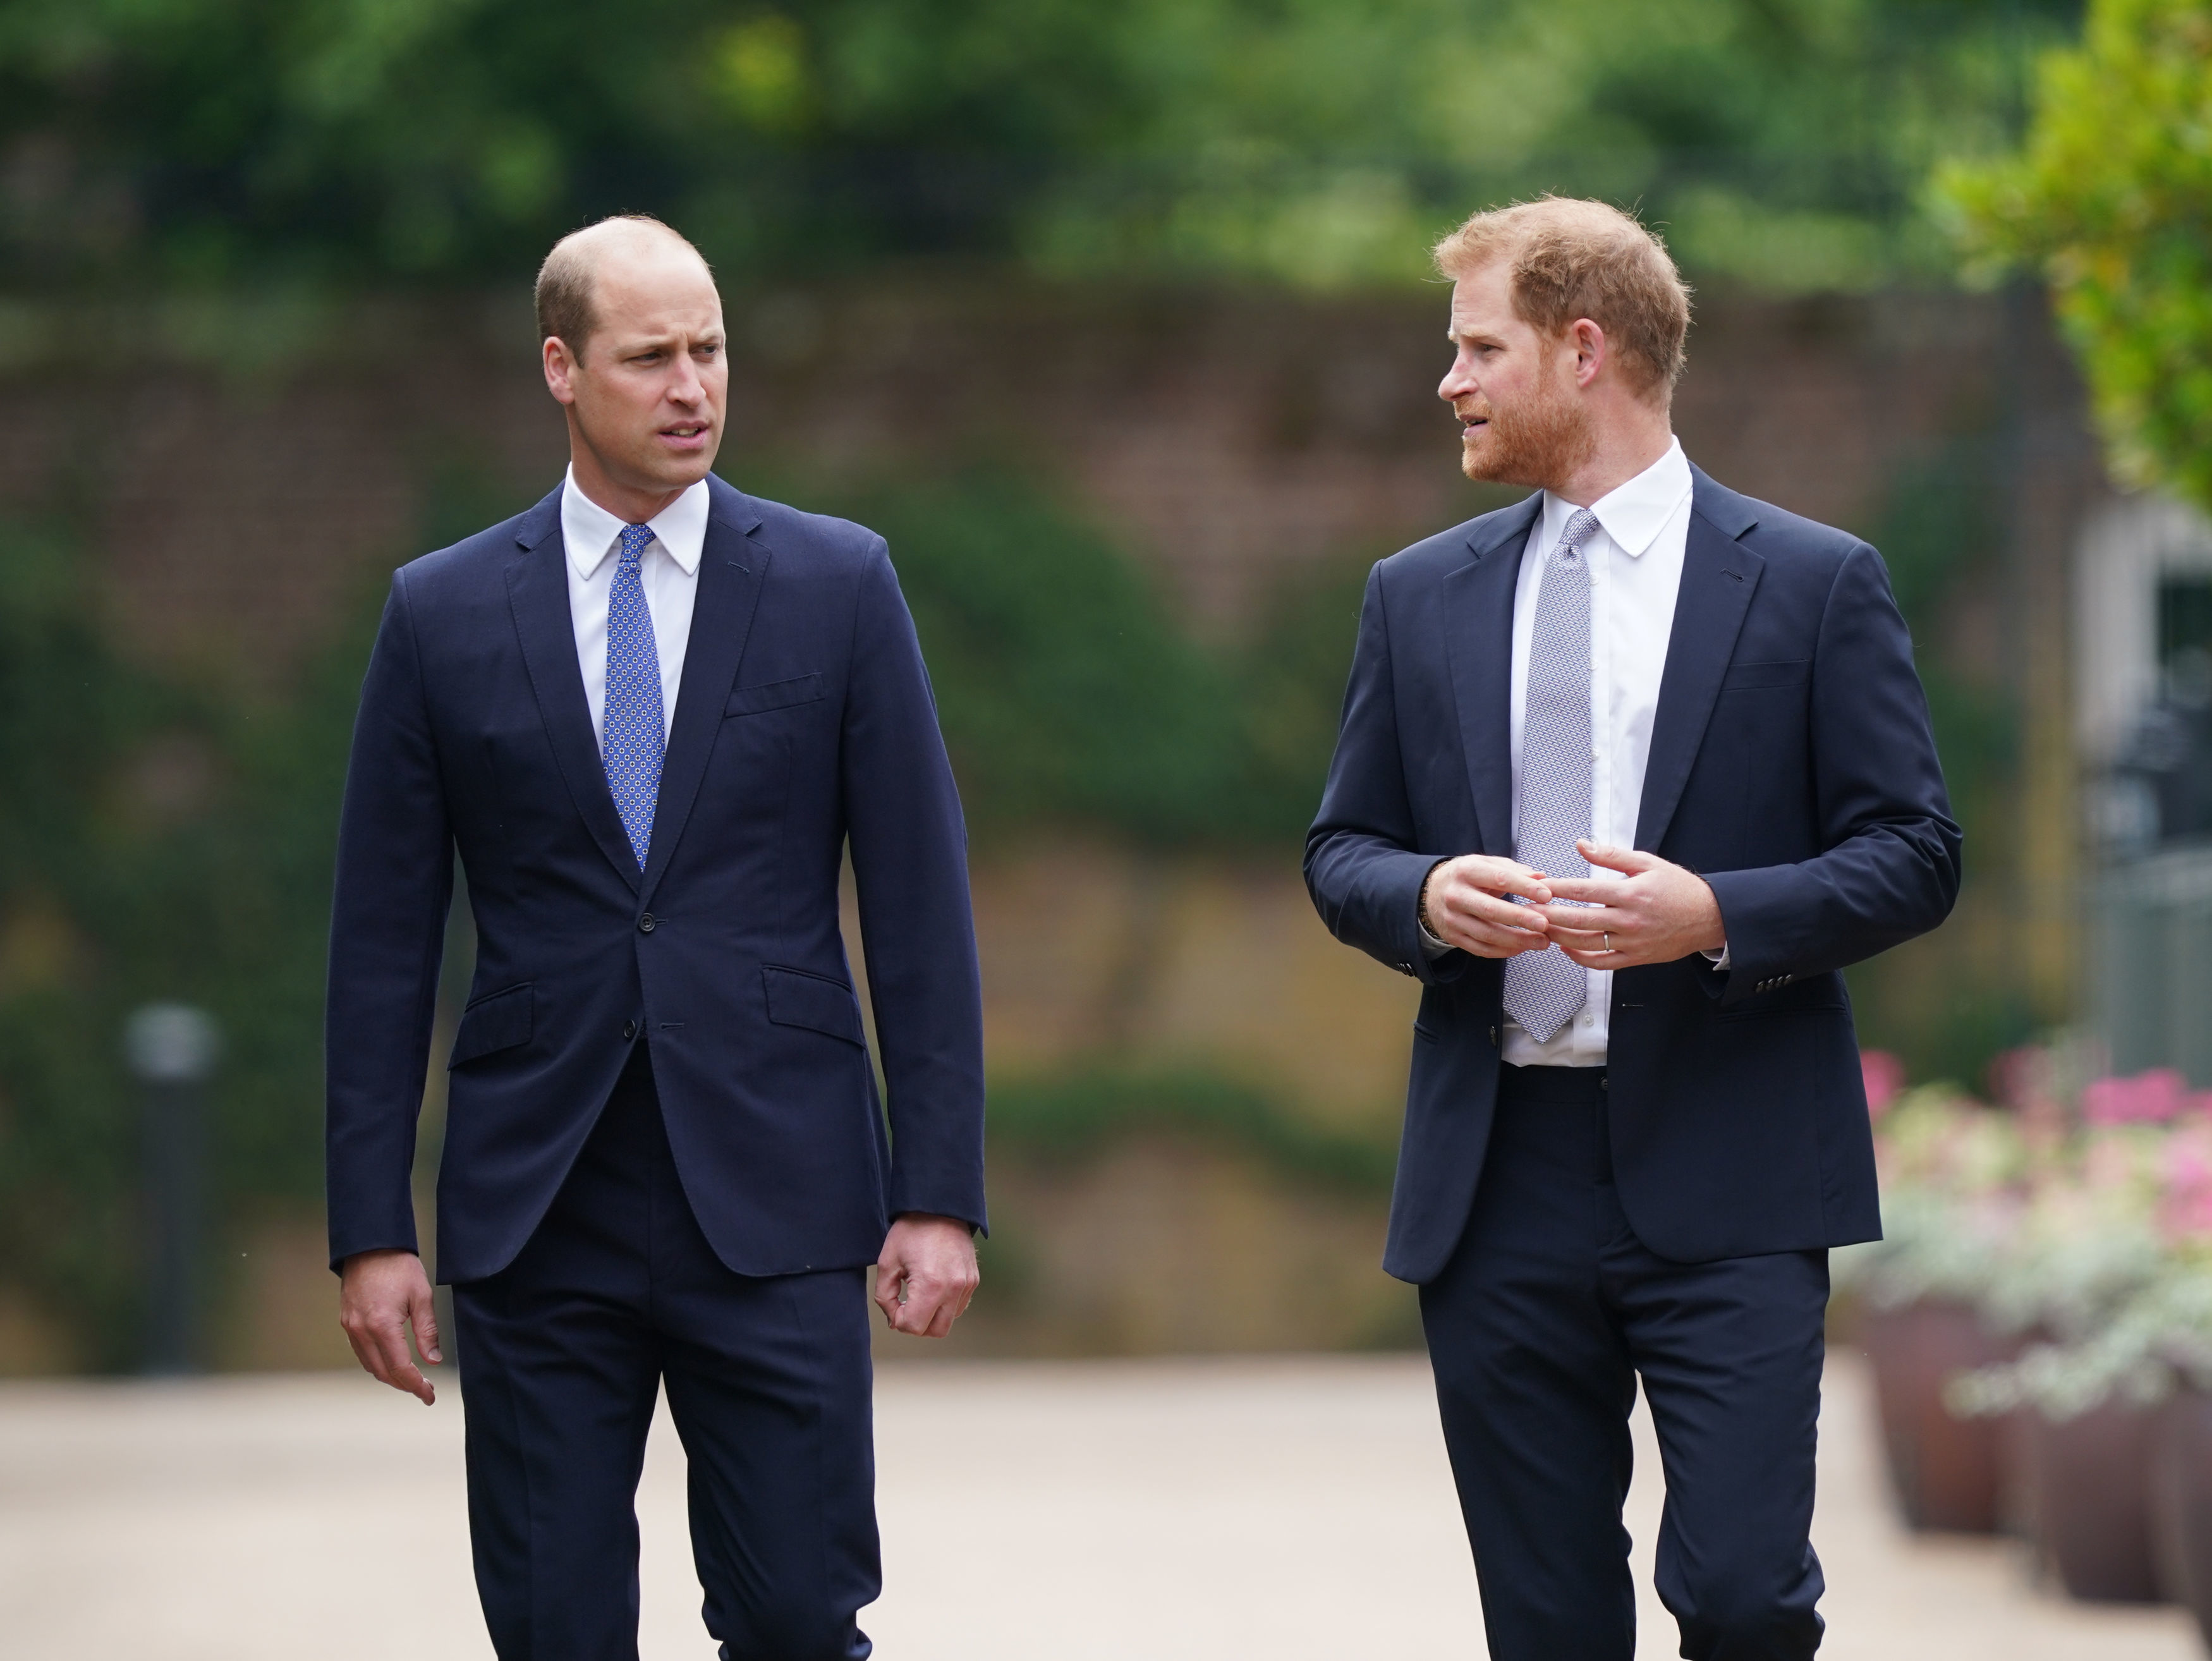 Prince William and Prince Harry at the unveiling of a statue they commissioned of their mother Diana, Princess of Wales in London, England on July 1, 2021 | Source: Getty Images